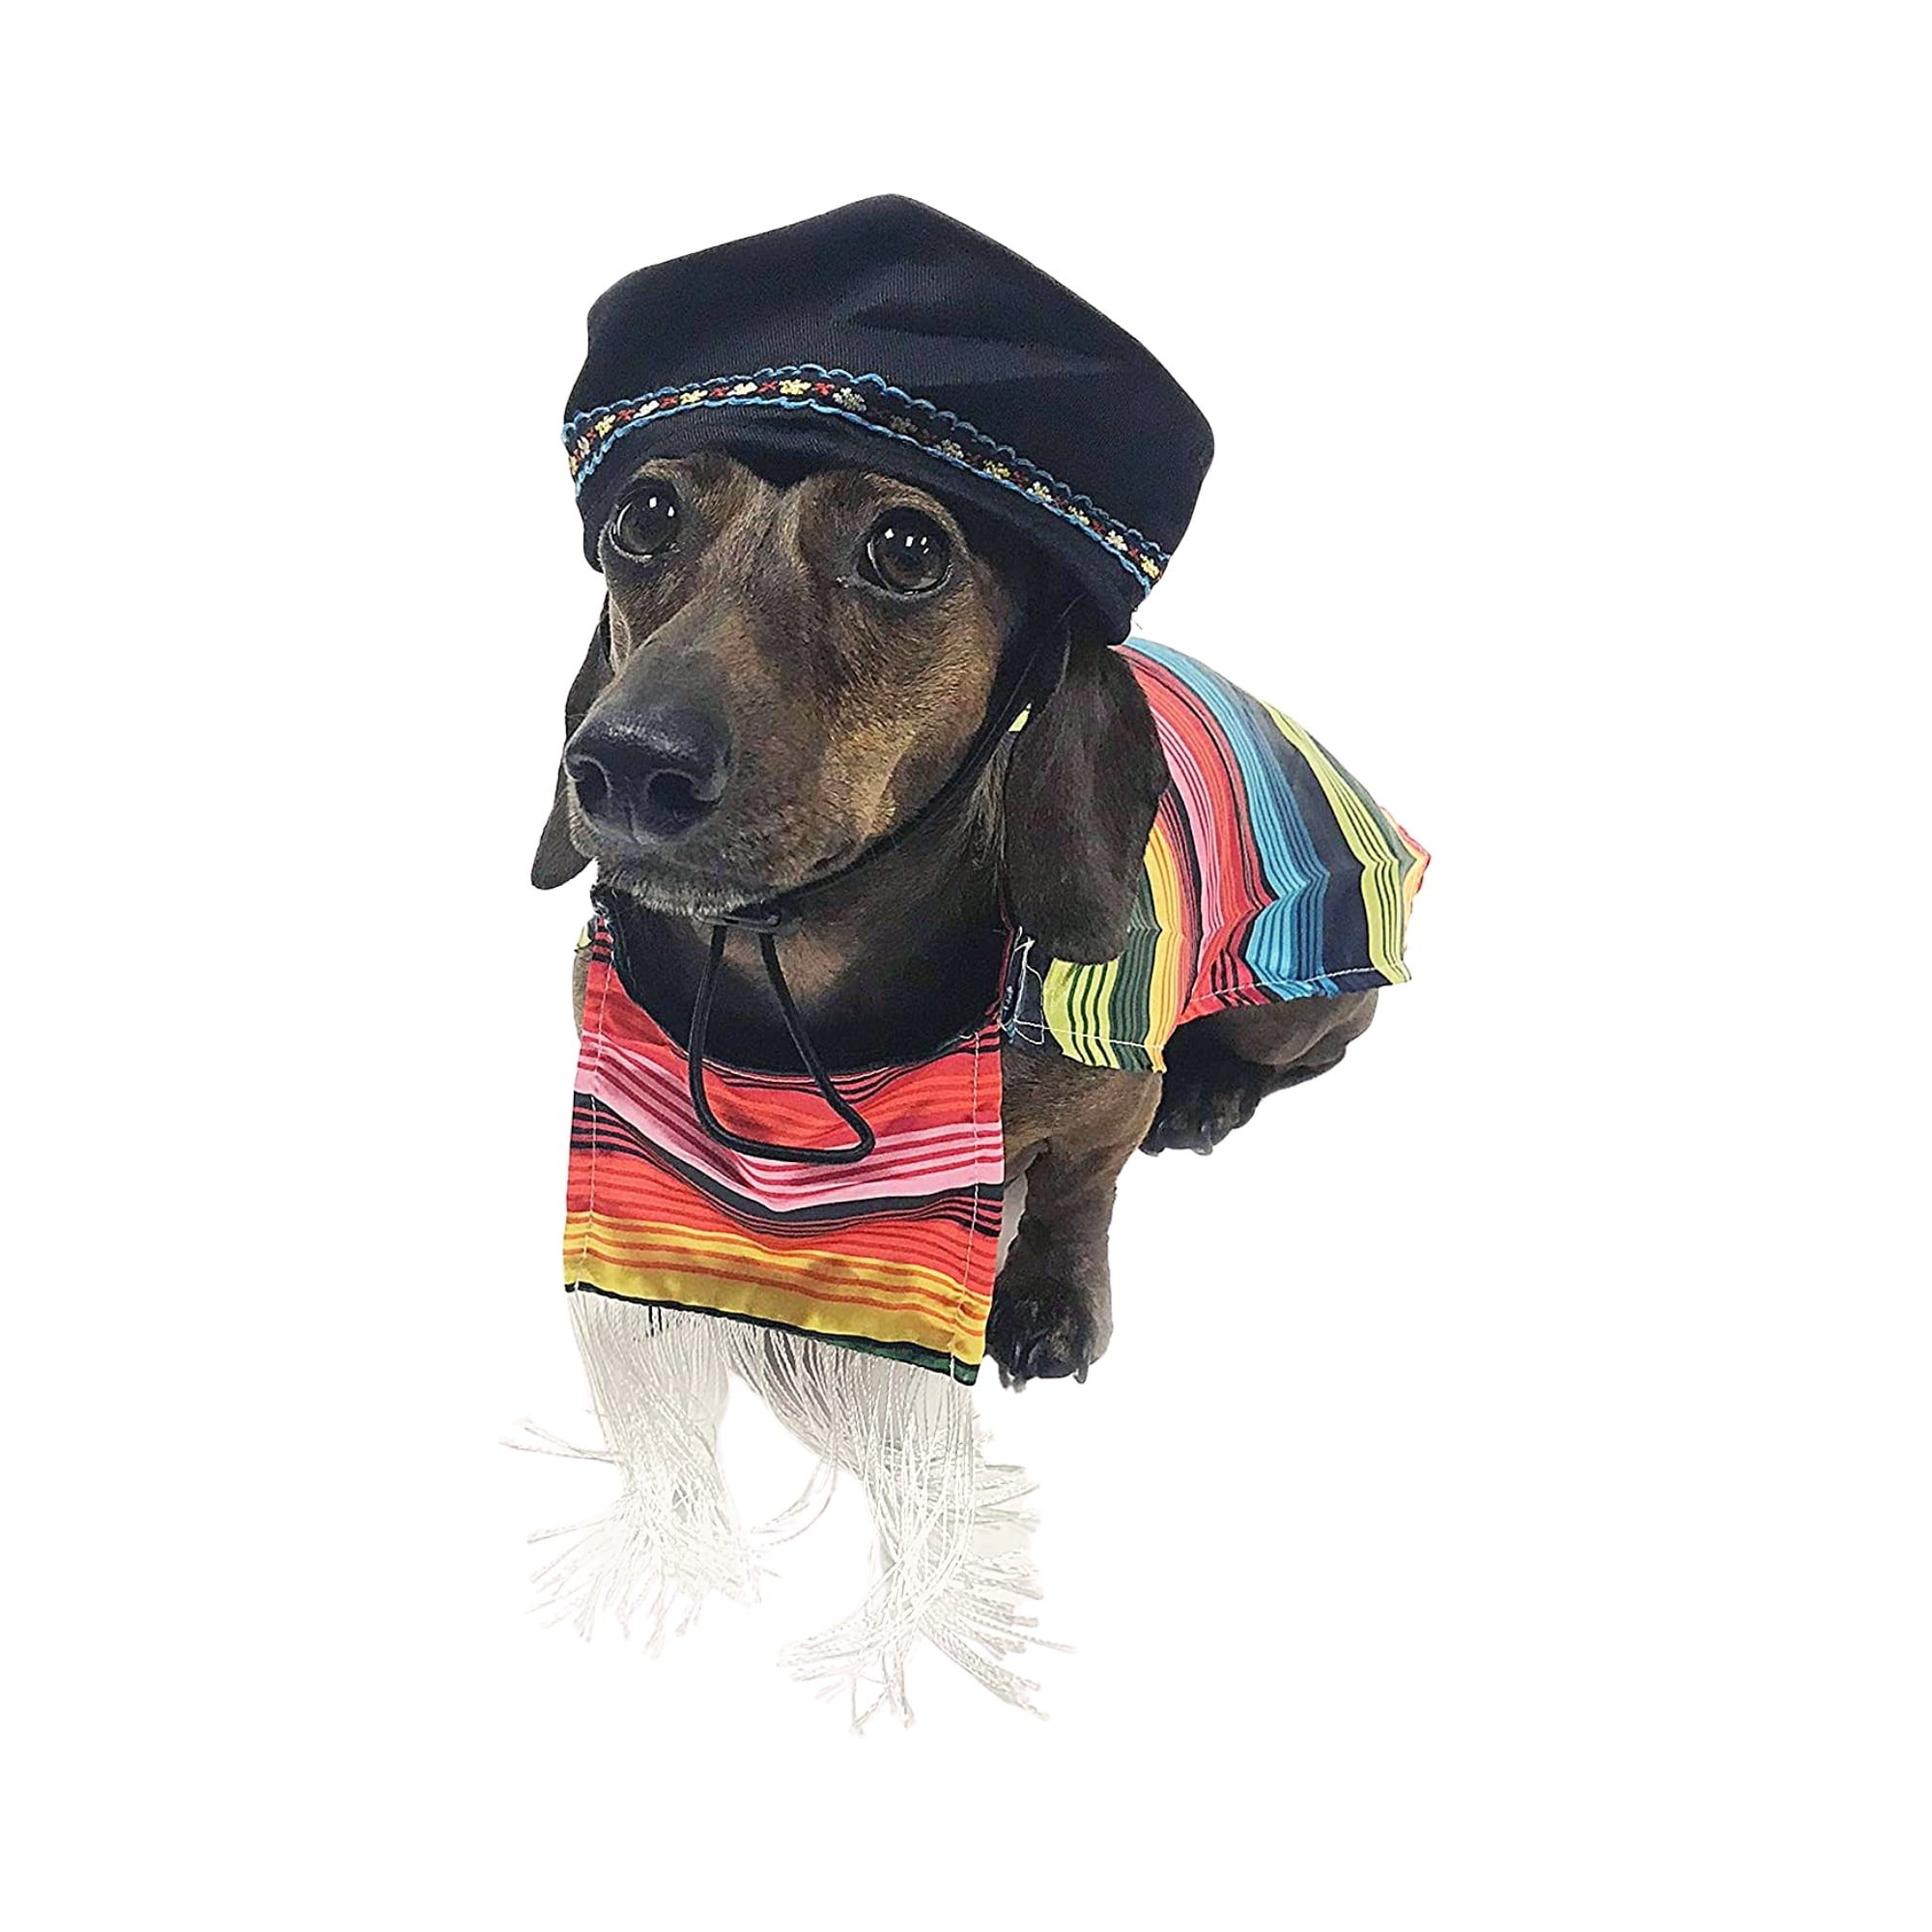 Rubies Official Mexican Serape Pet Dog Costume